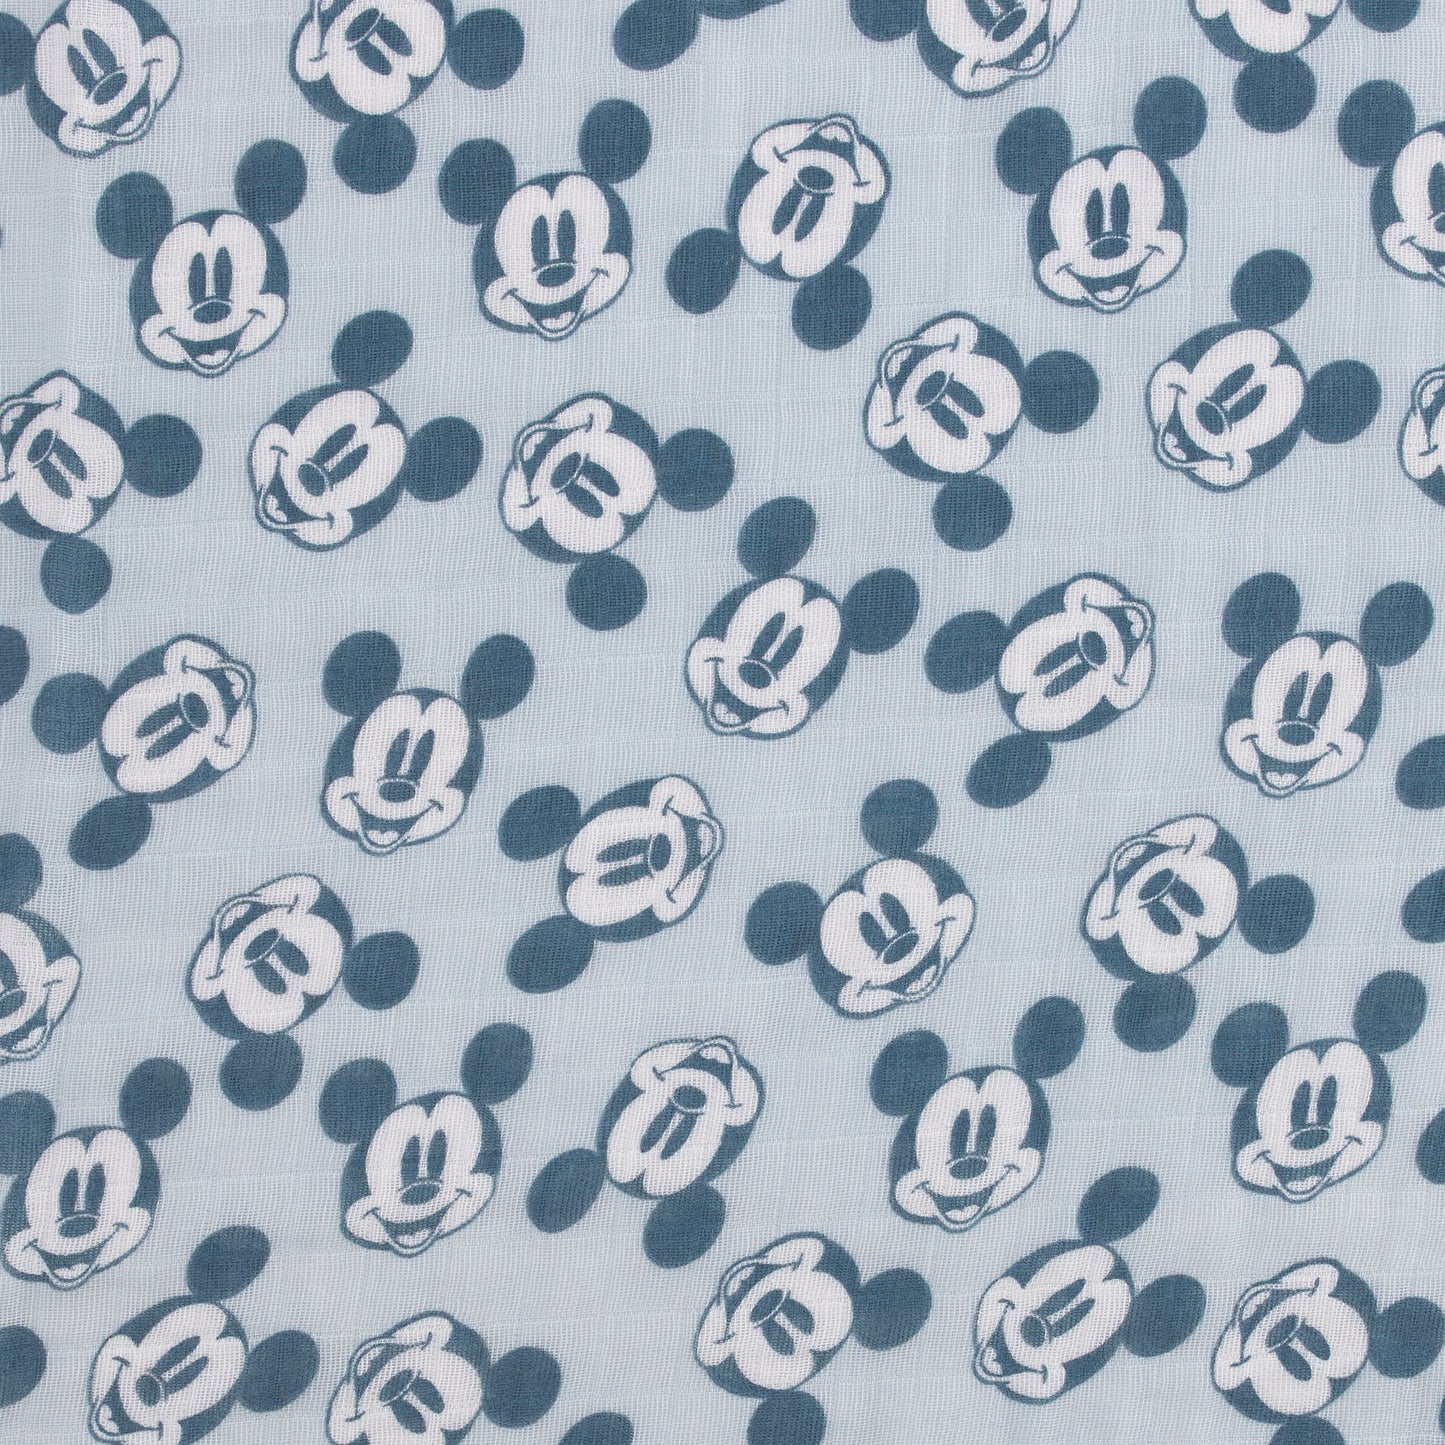 Disney Mickey Mouse Gray, Charcoal, and White 3 Piece Muslin Swaddle Baby Blanket Set